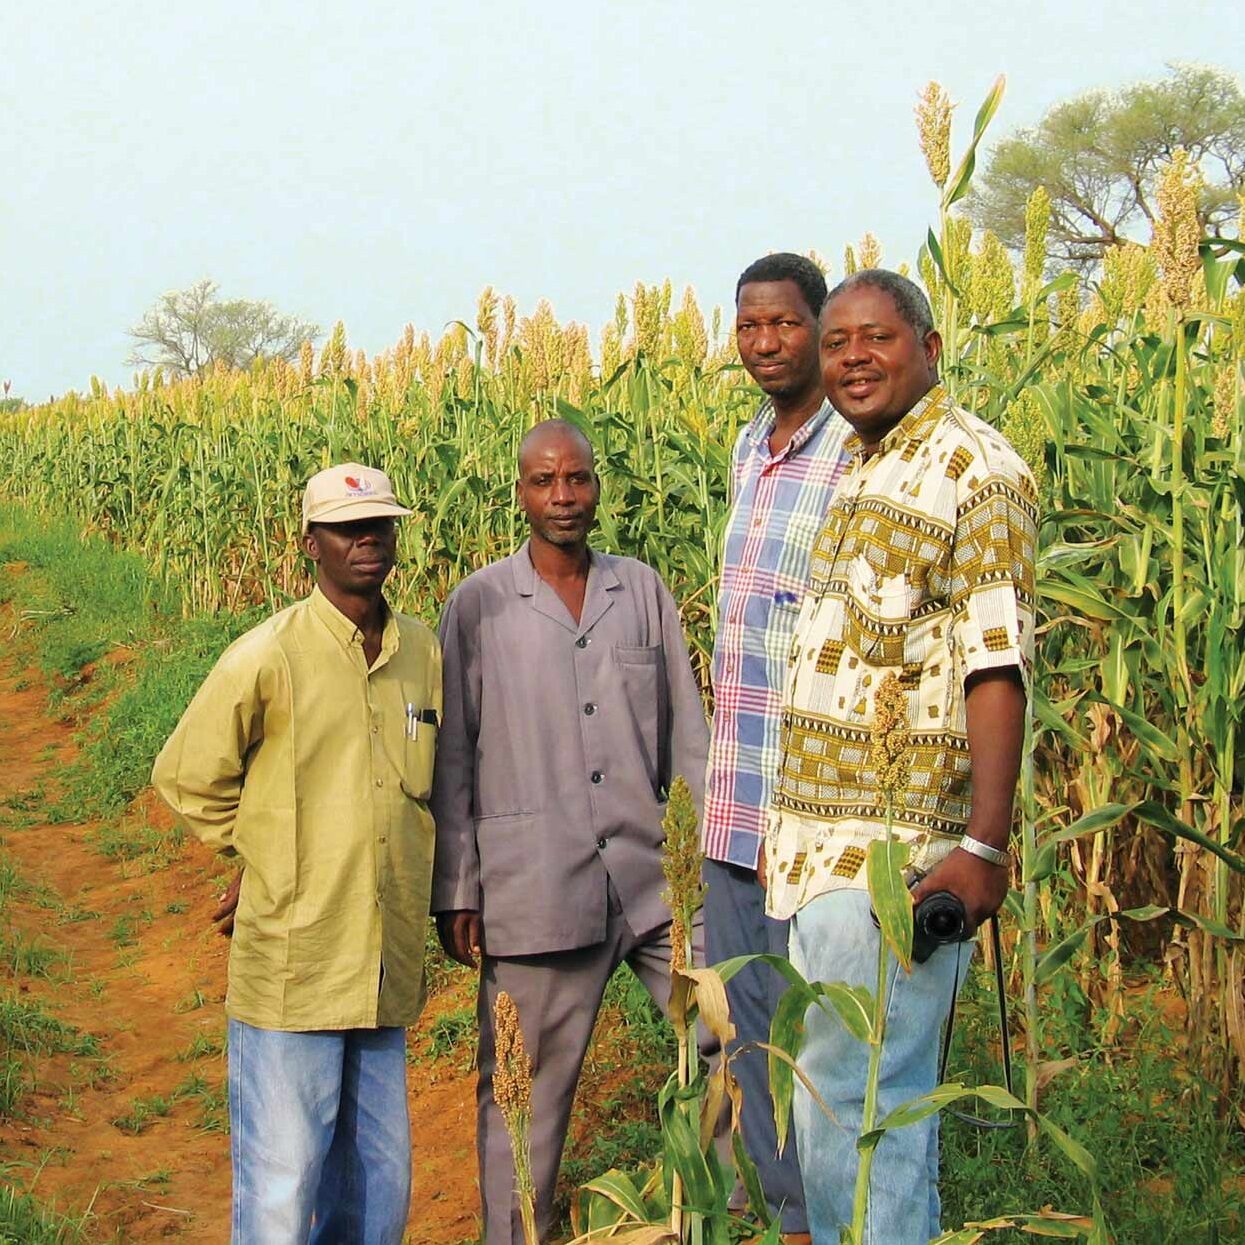 men standing together in a field